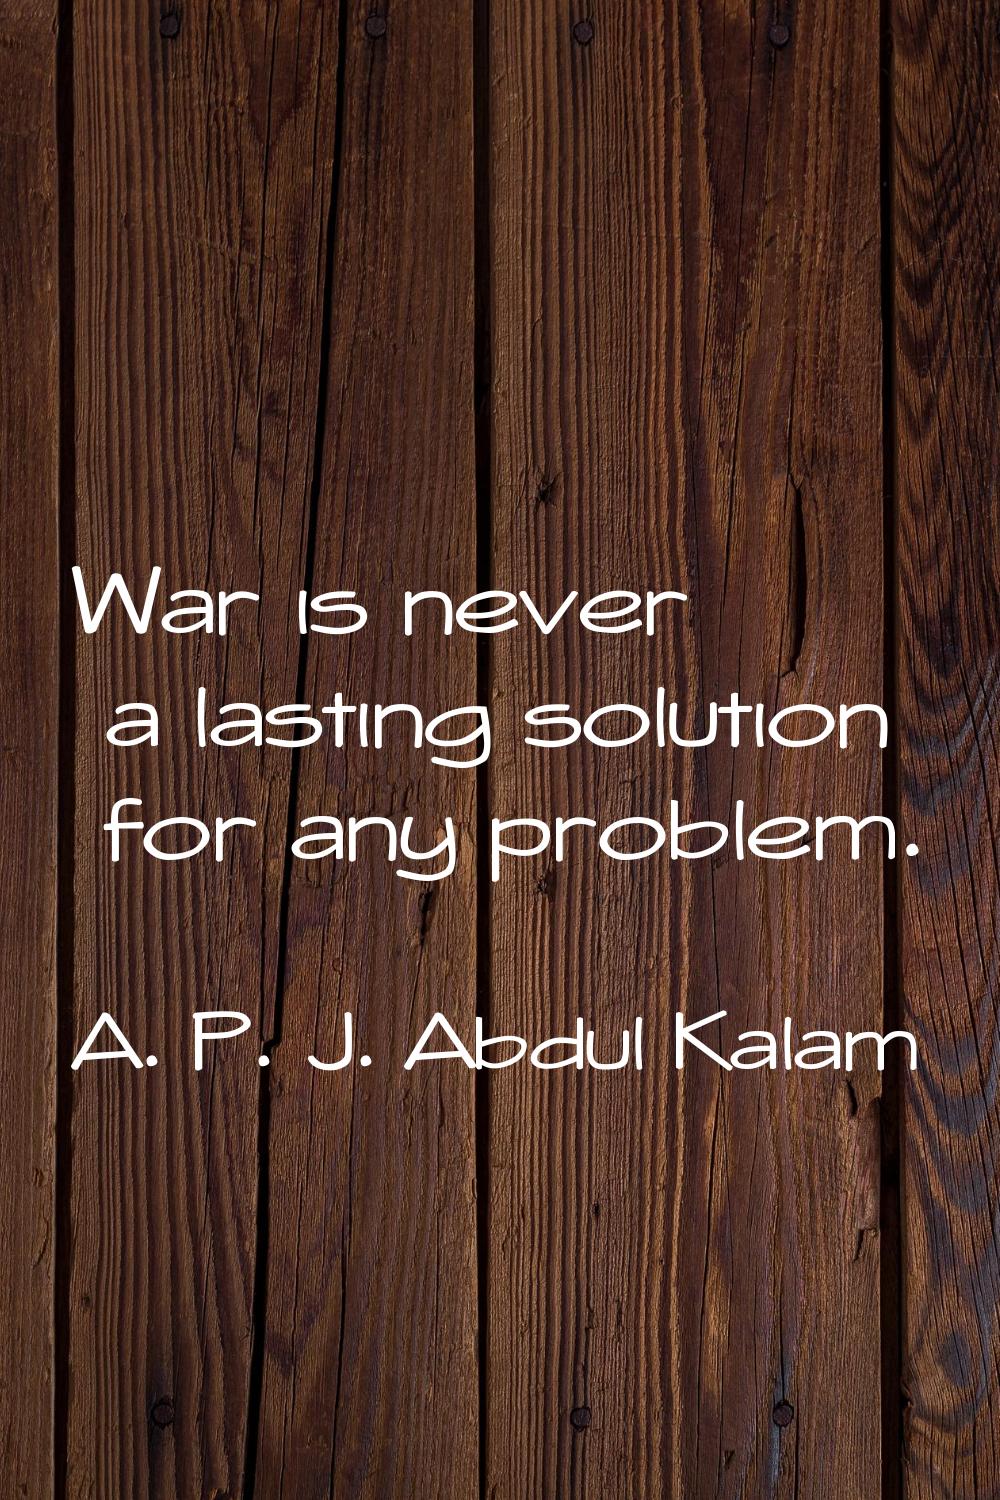 War is never a lasting solution for any problem.